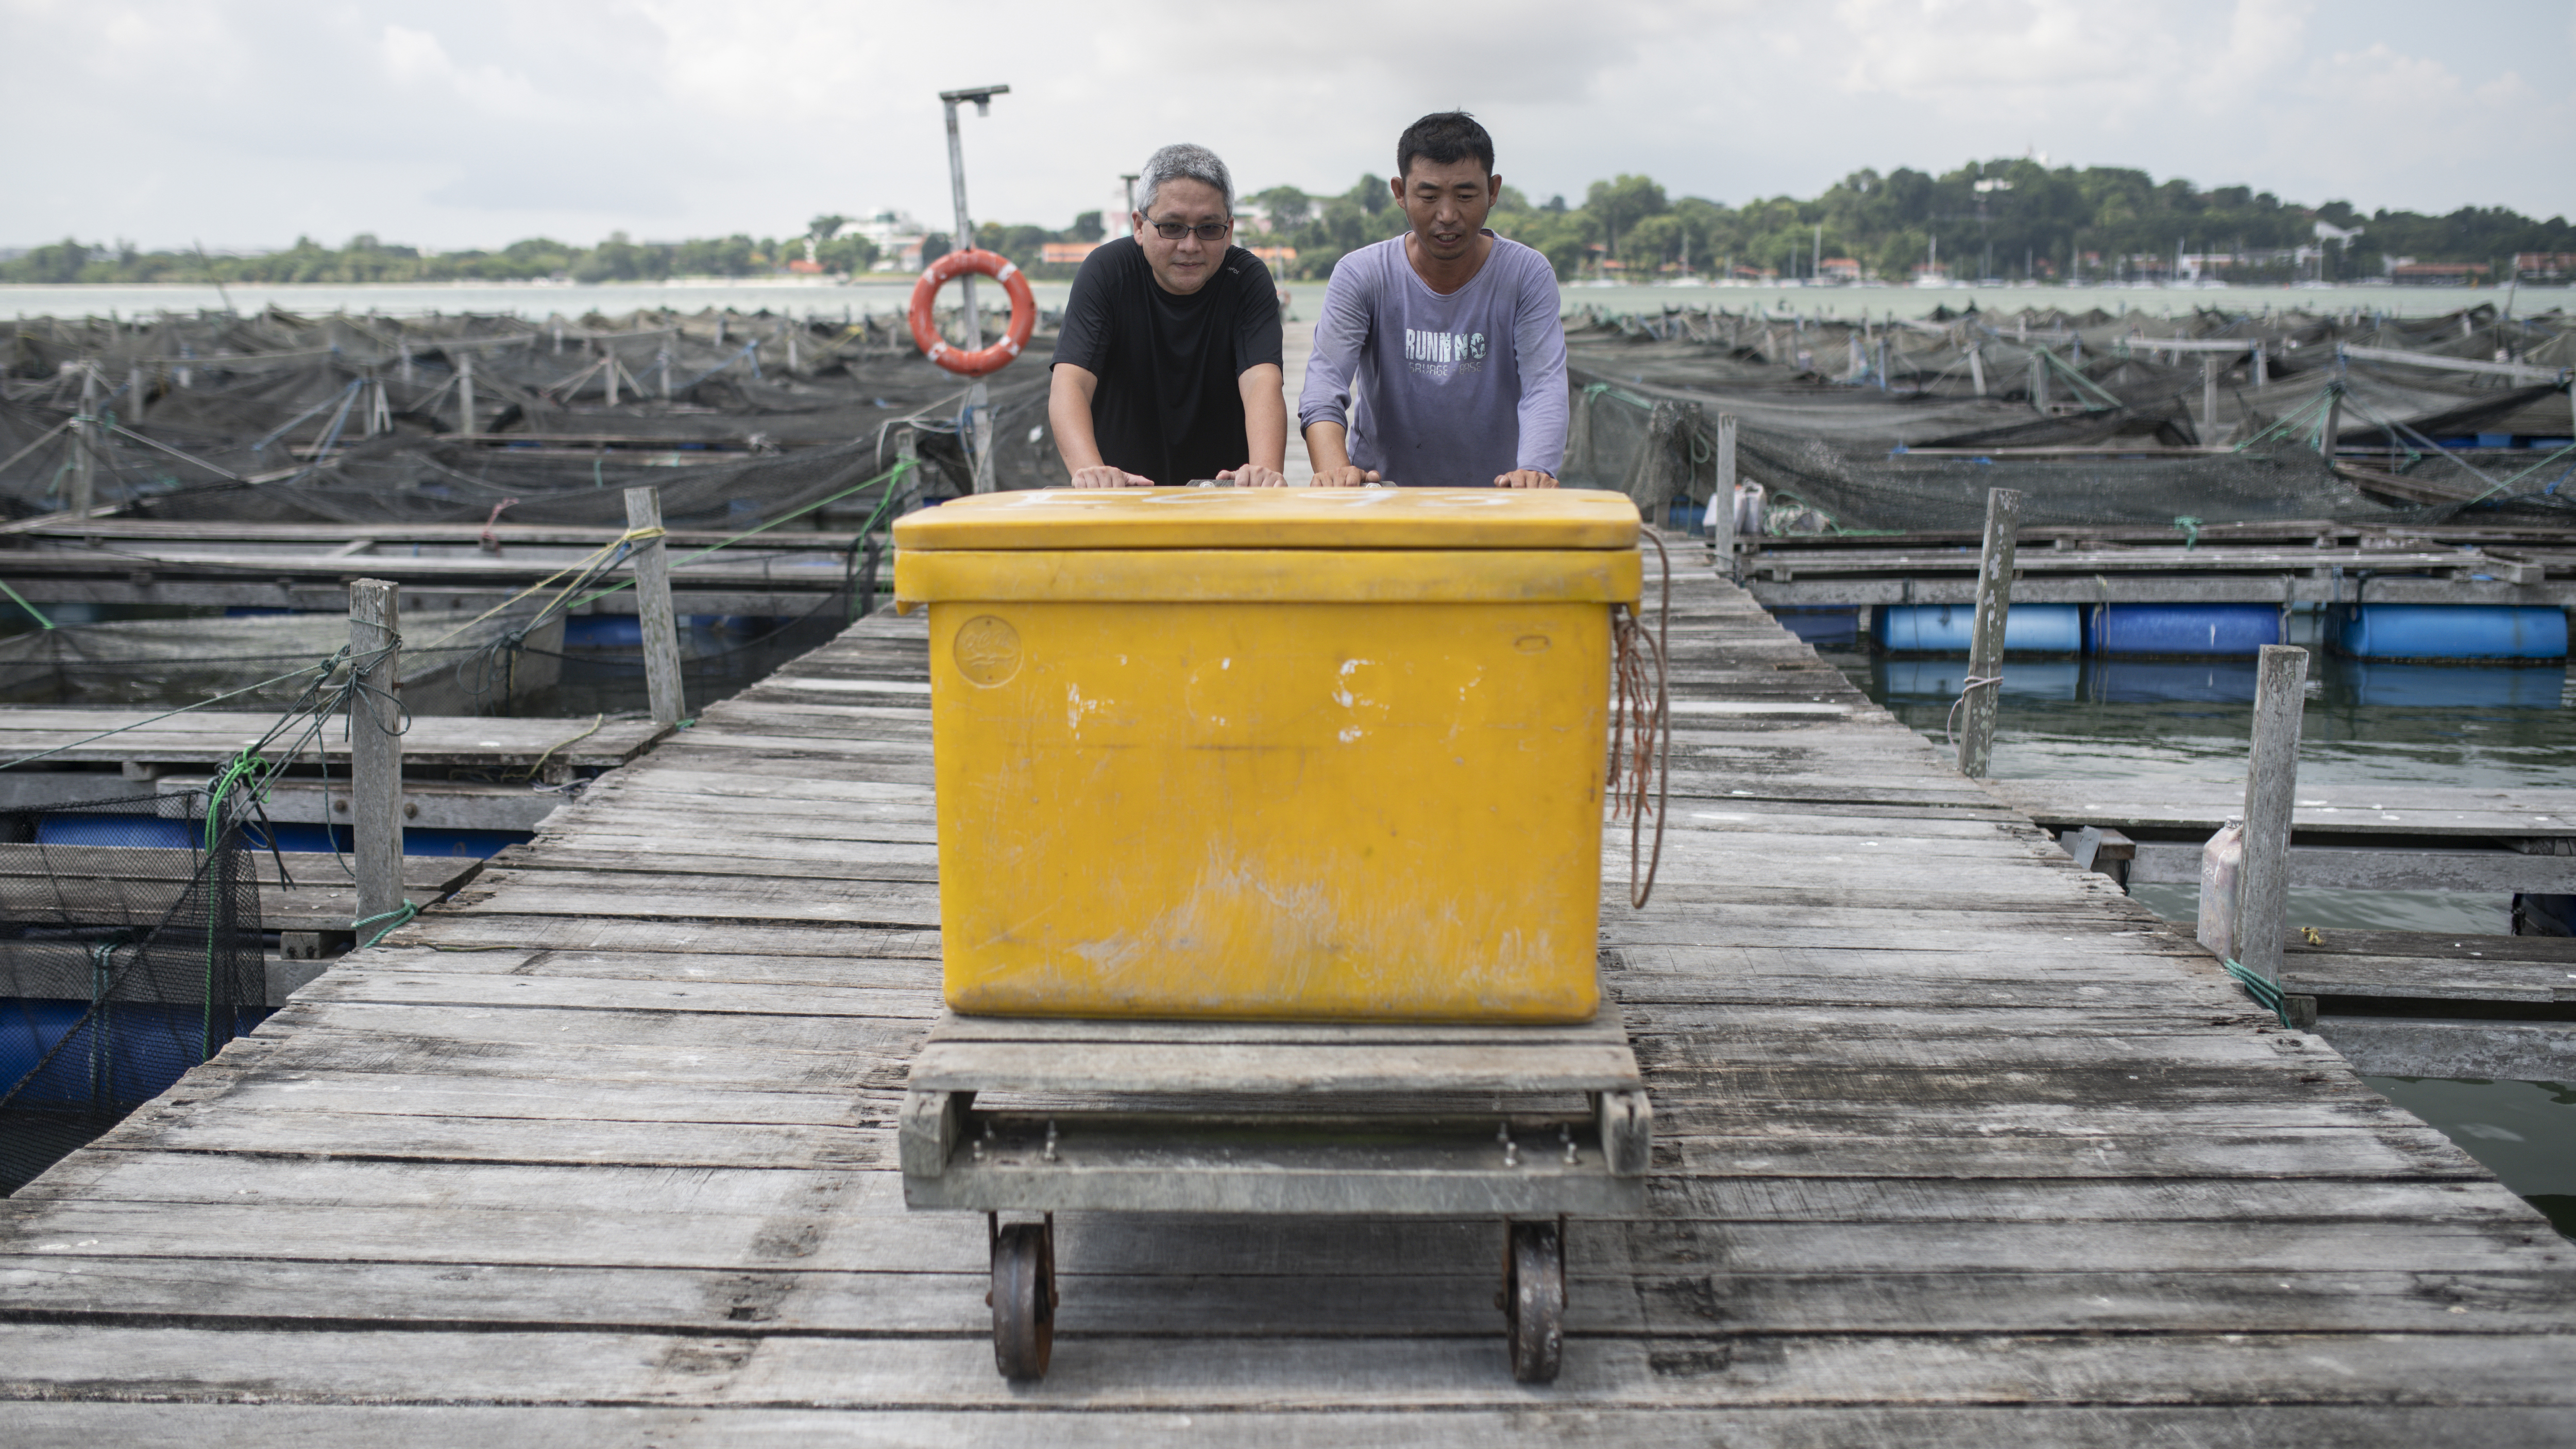 What’s the most heart-warming aspect of being a fish farmer? Image